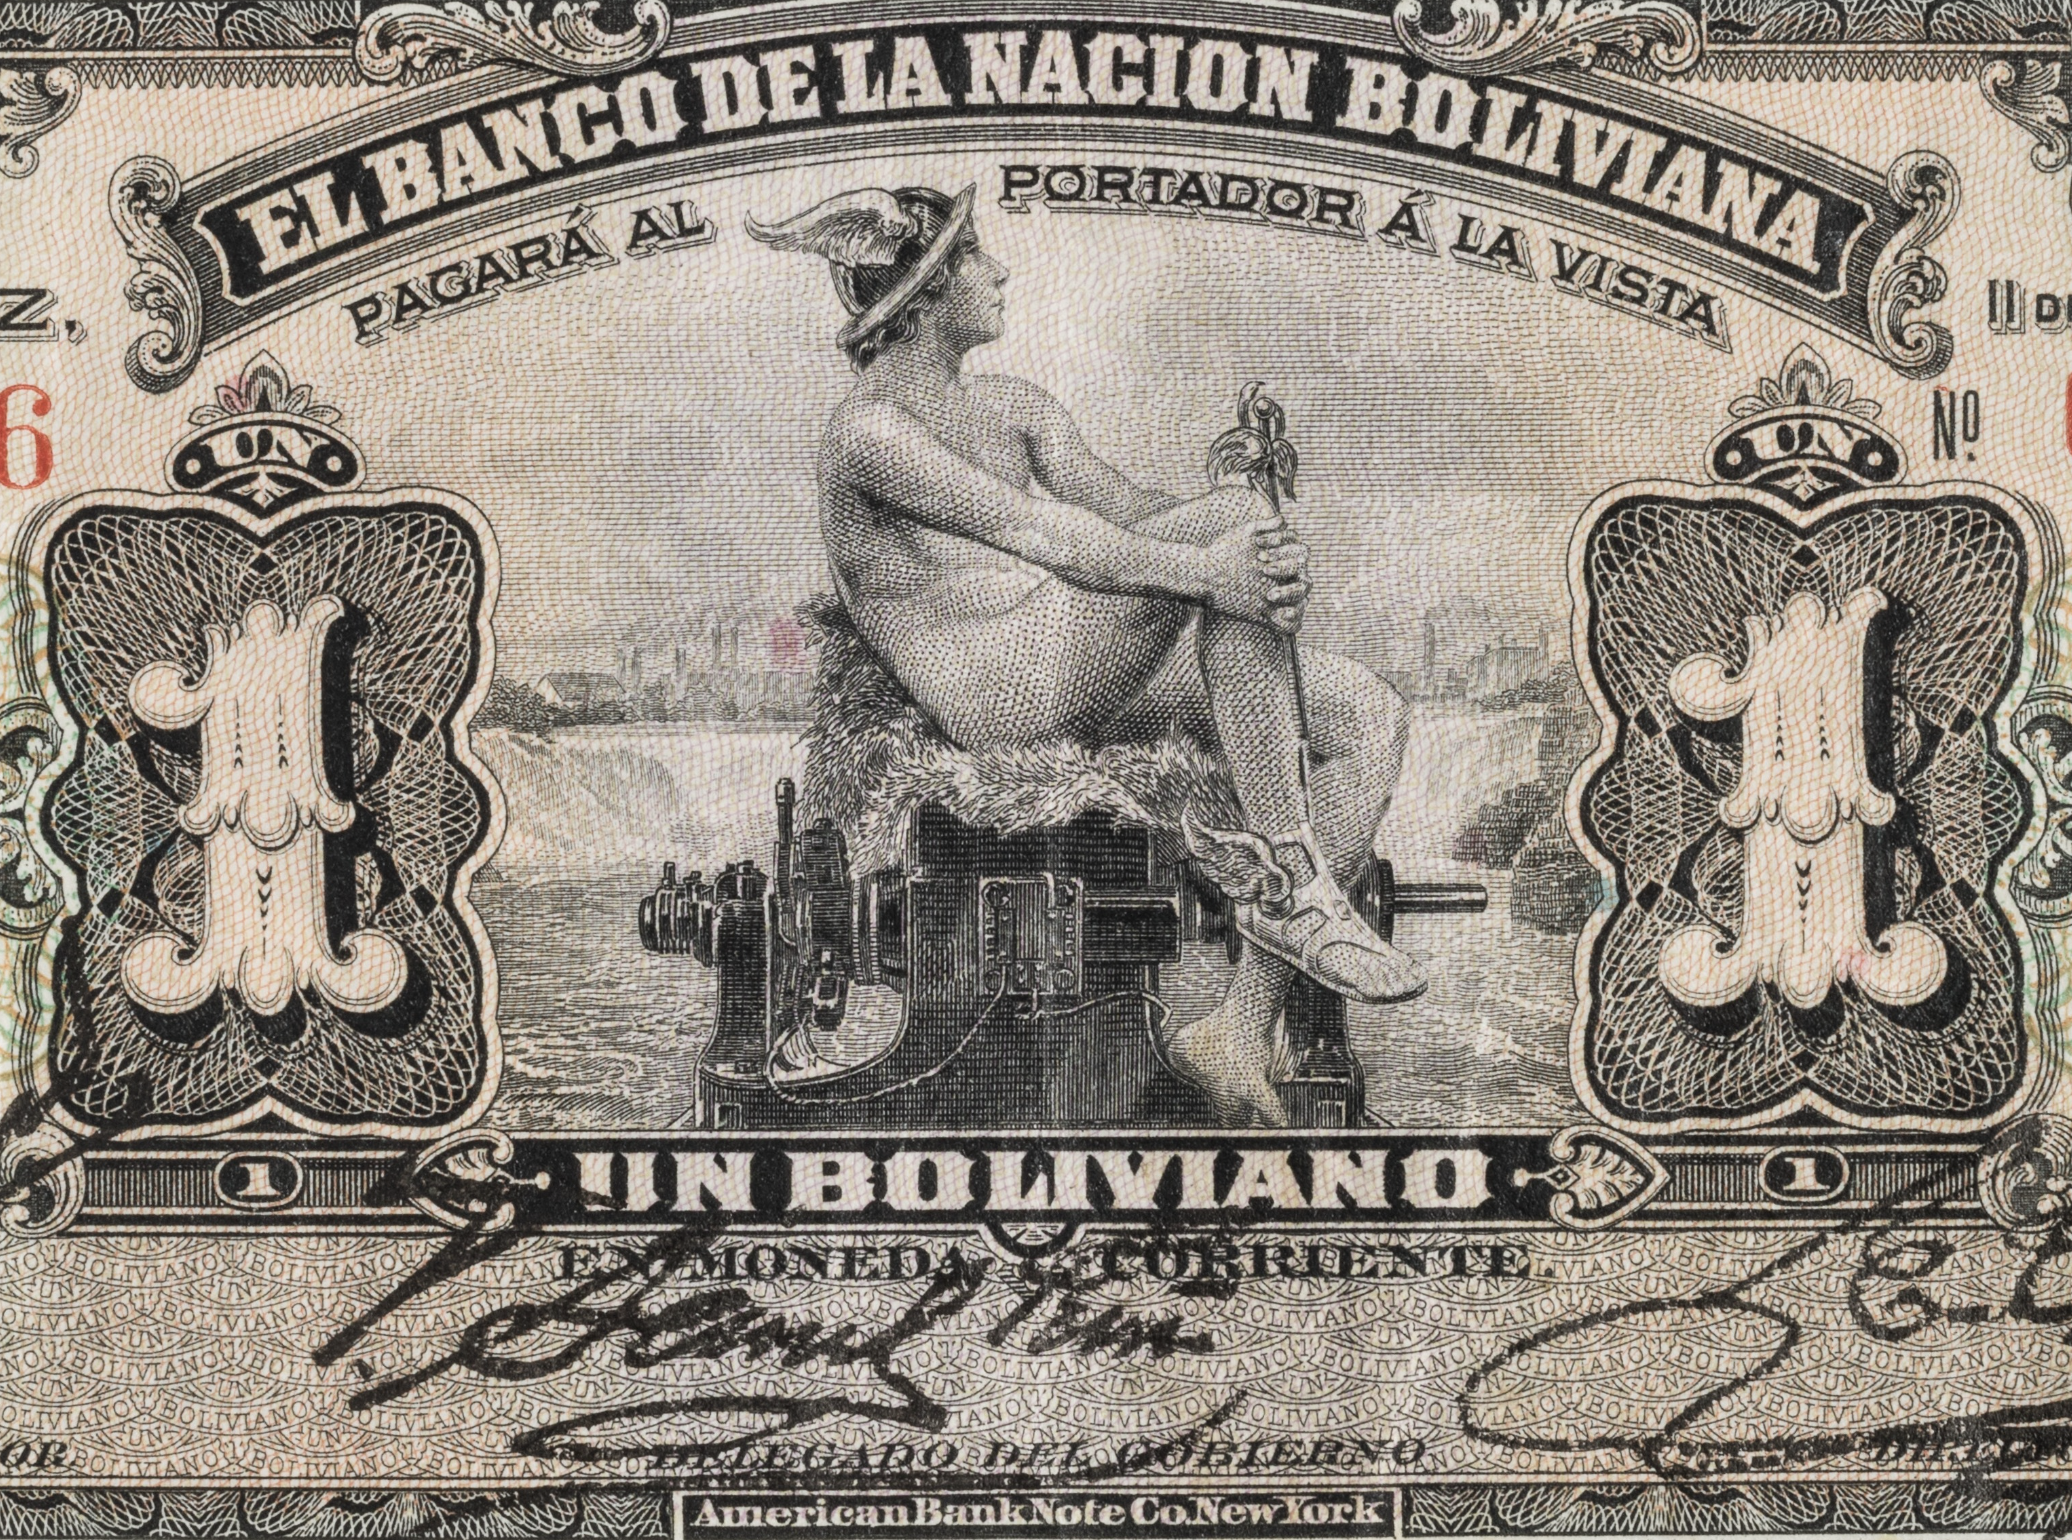 Bolivia's Central Bank Independence: when U.S. Expertise was welcome in...